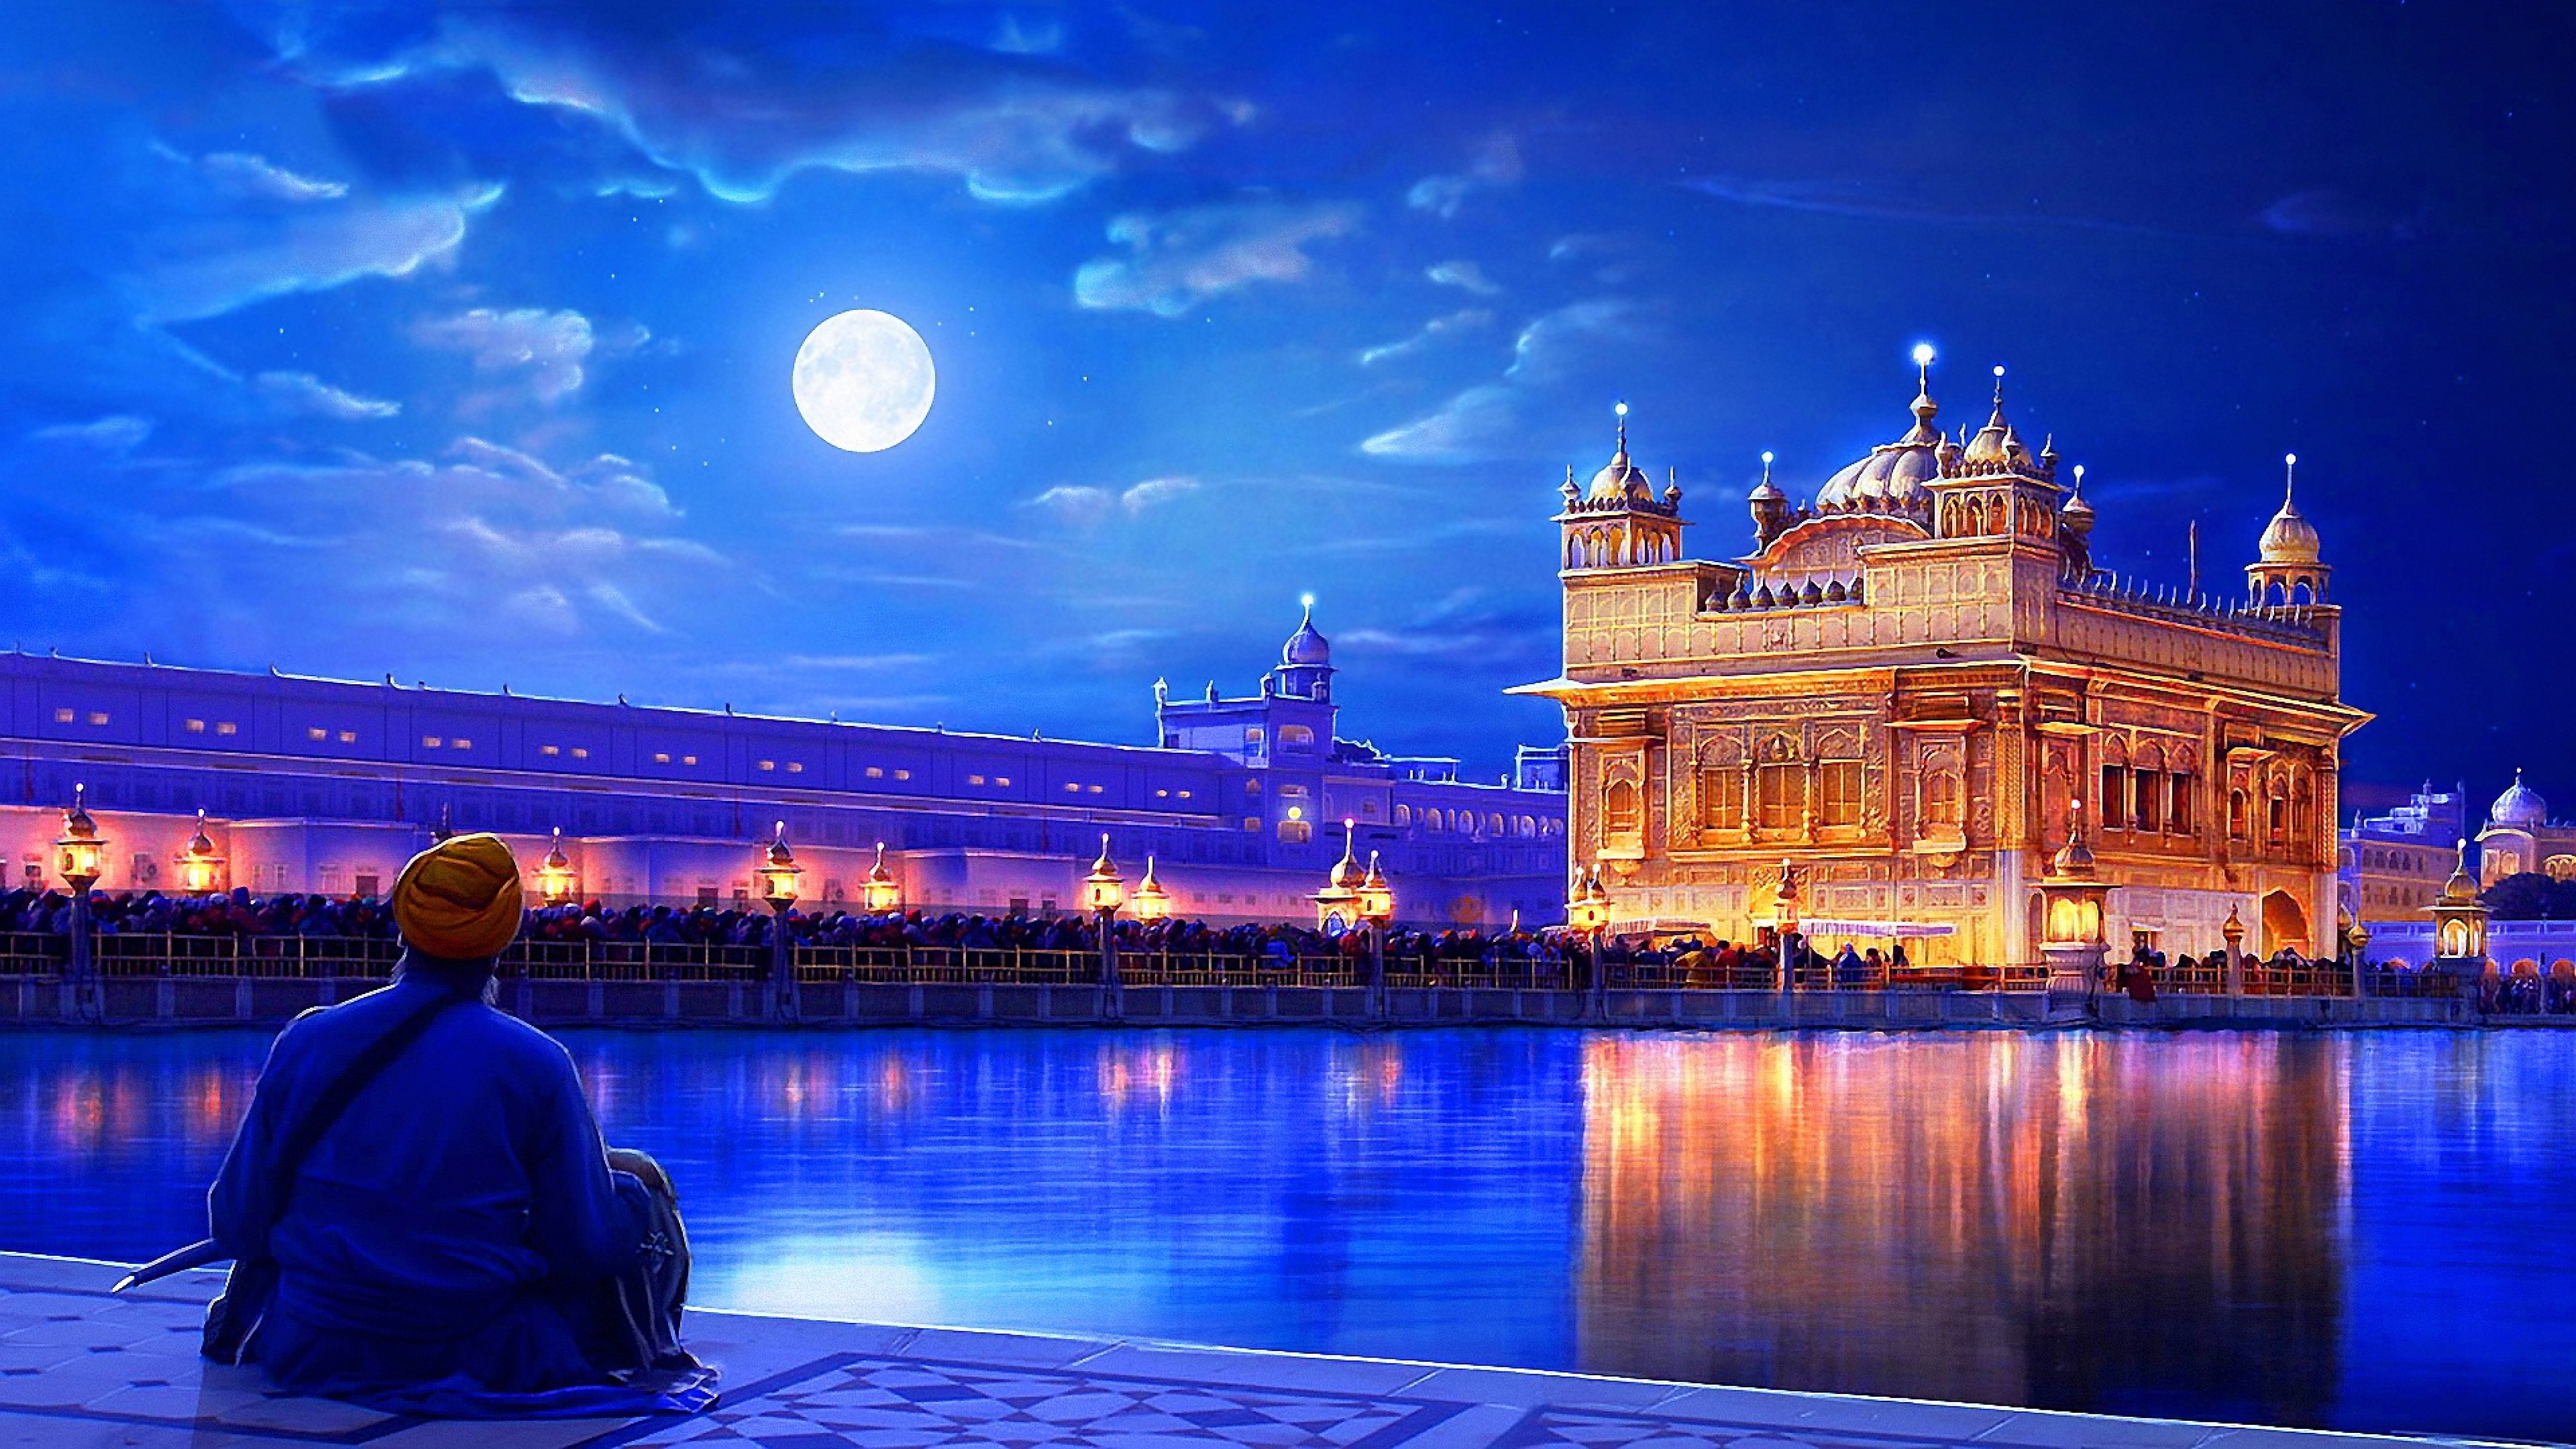 Golden Temple Amritsar India for 5120 x 2880 5K Ultra HD resolution